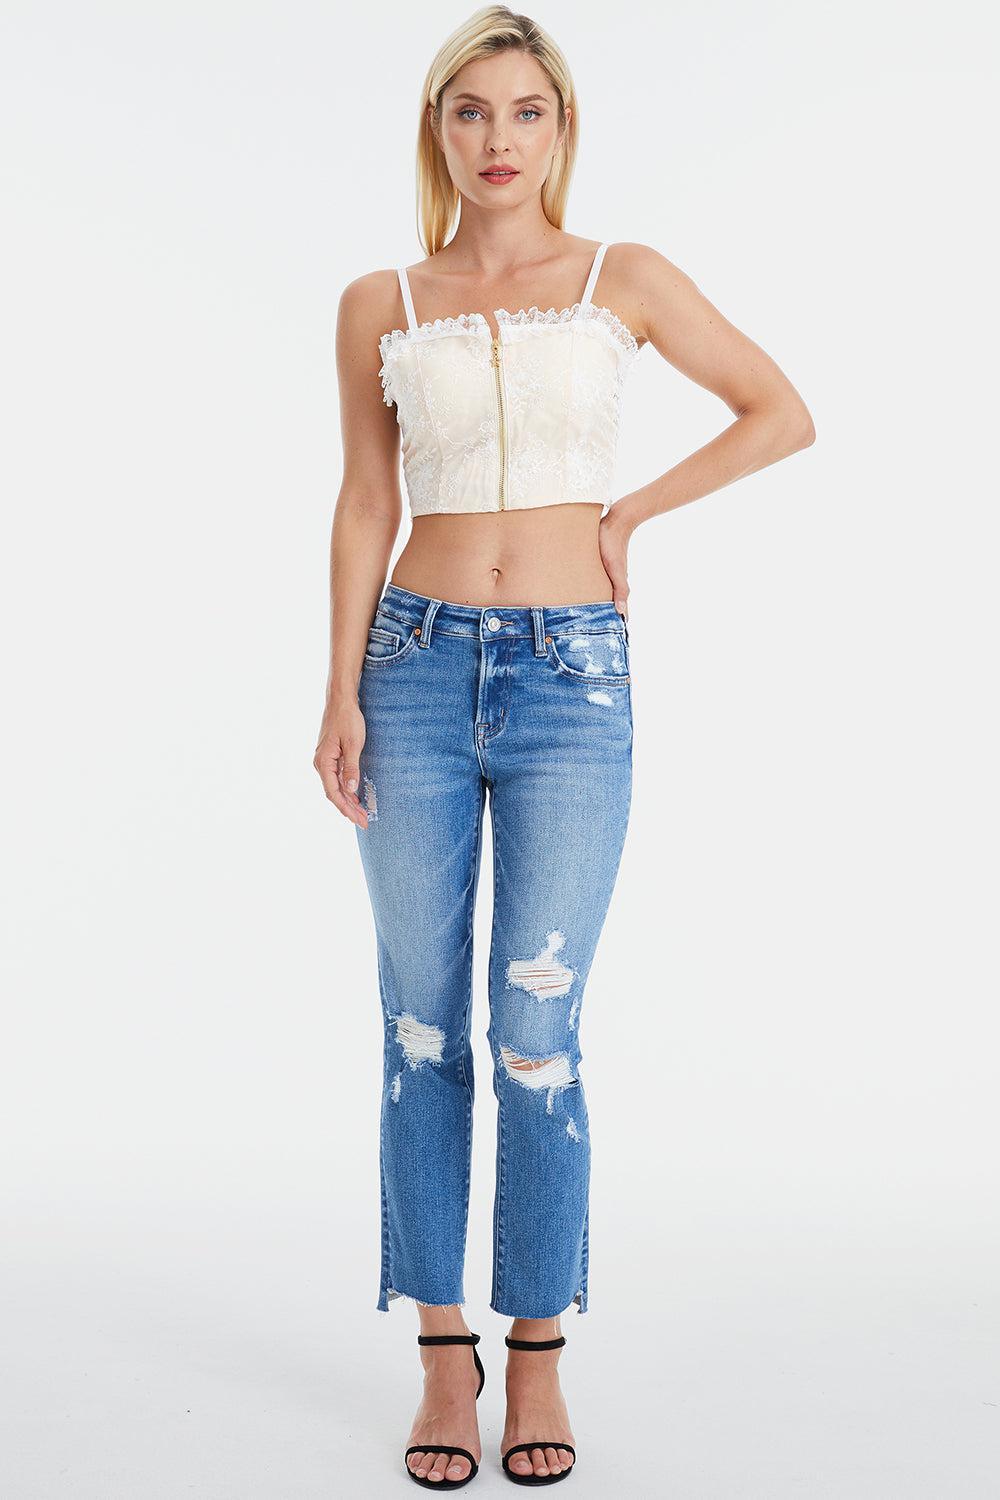 a woman in ripped jeans and a crop top